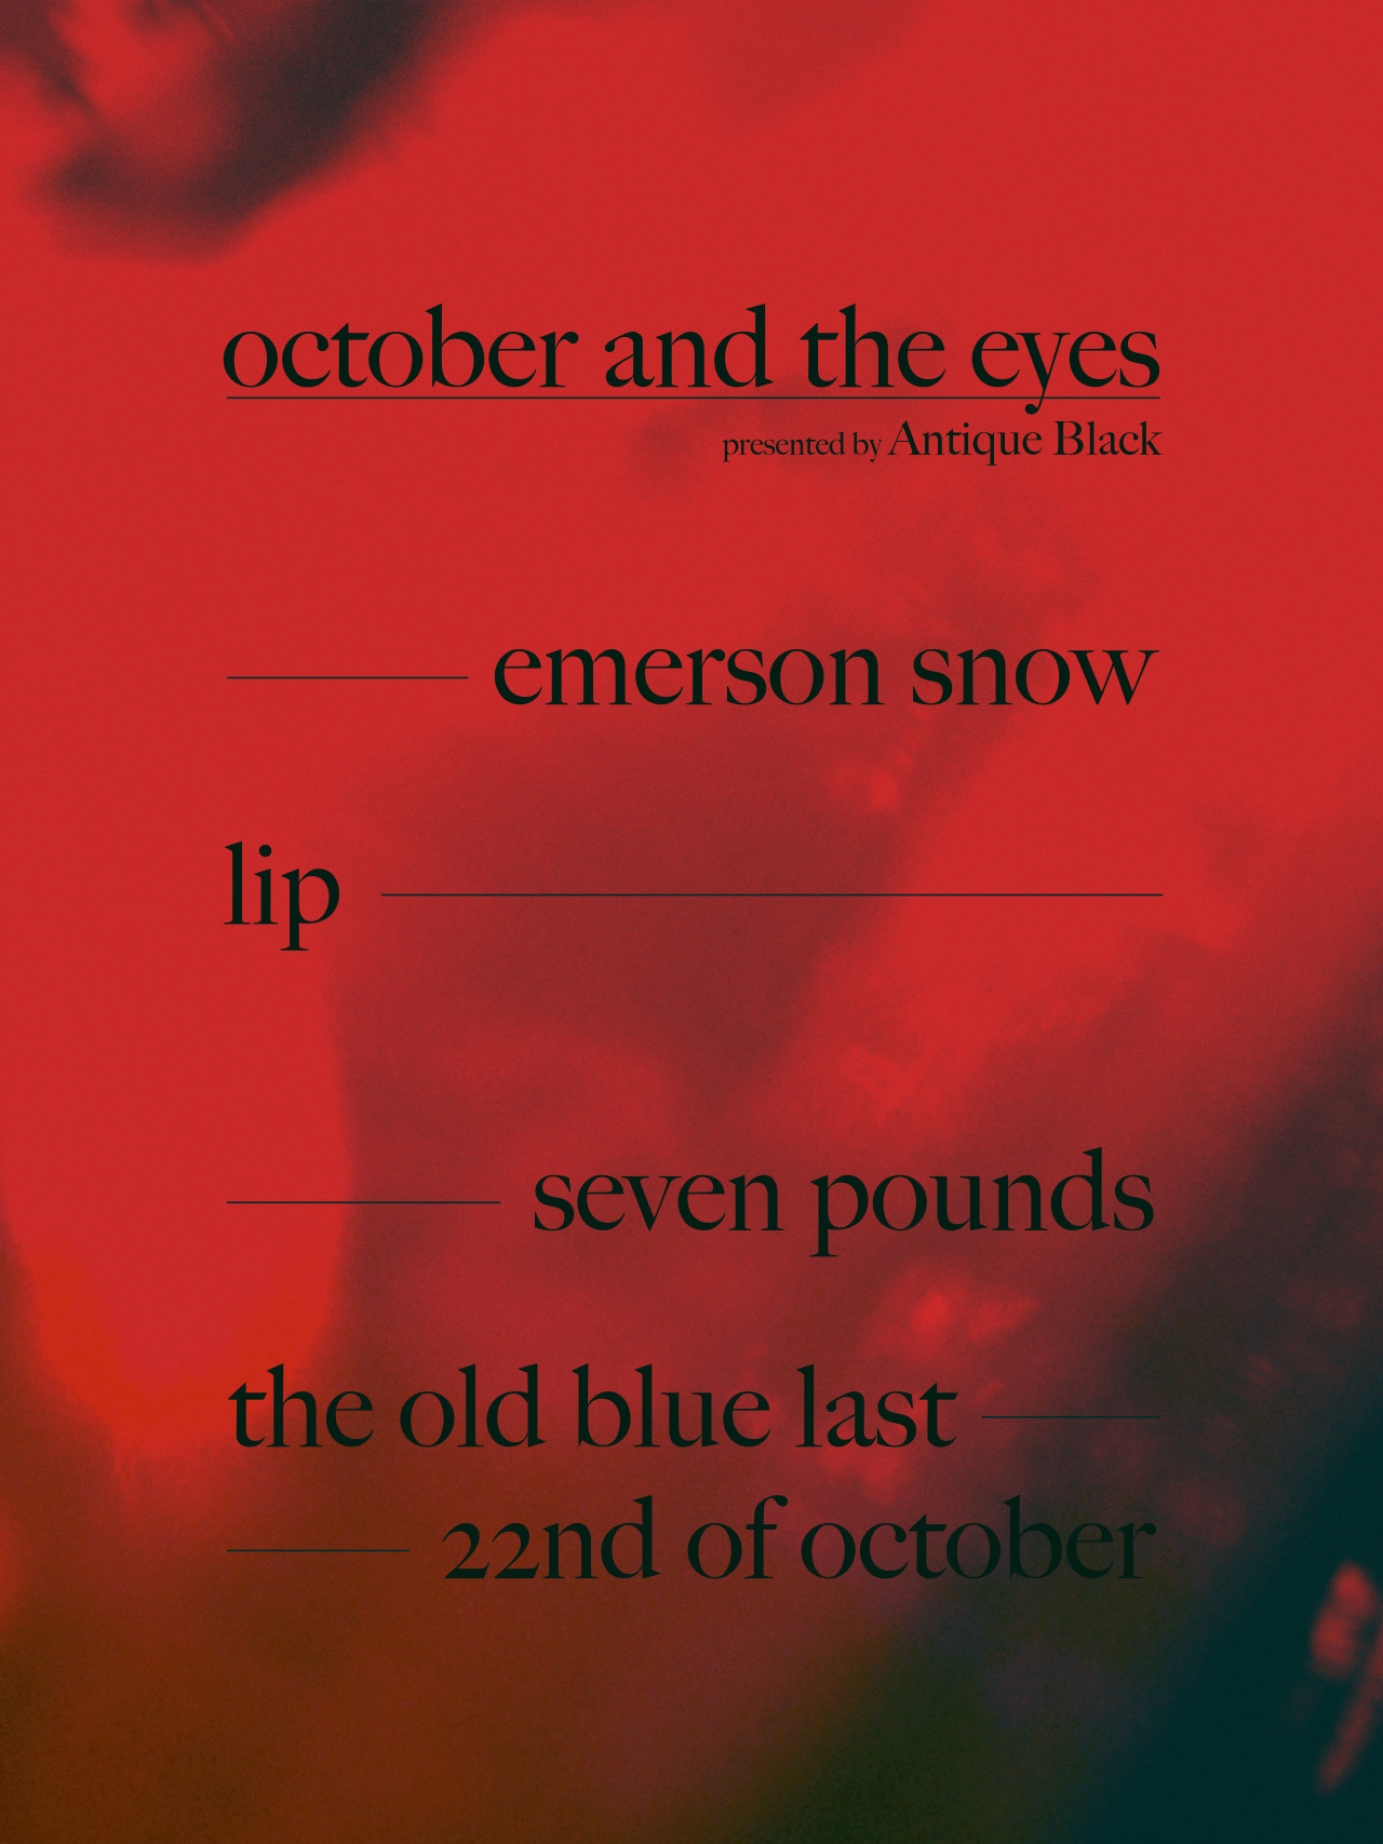 October And The Eyes @ The Old Blue Last